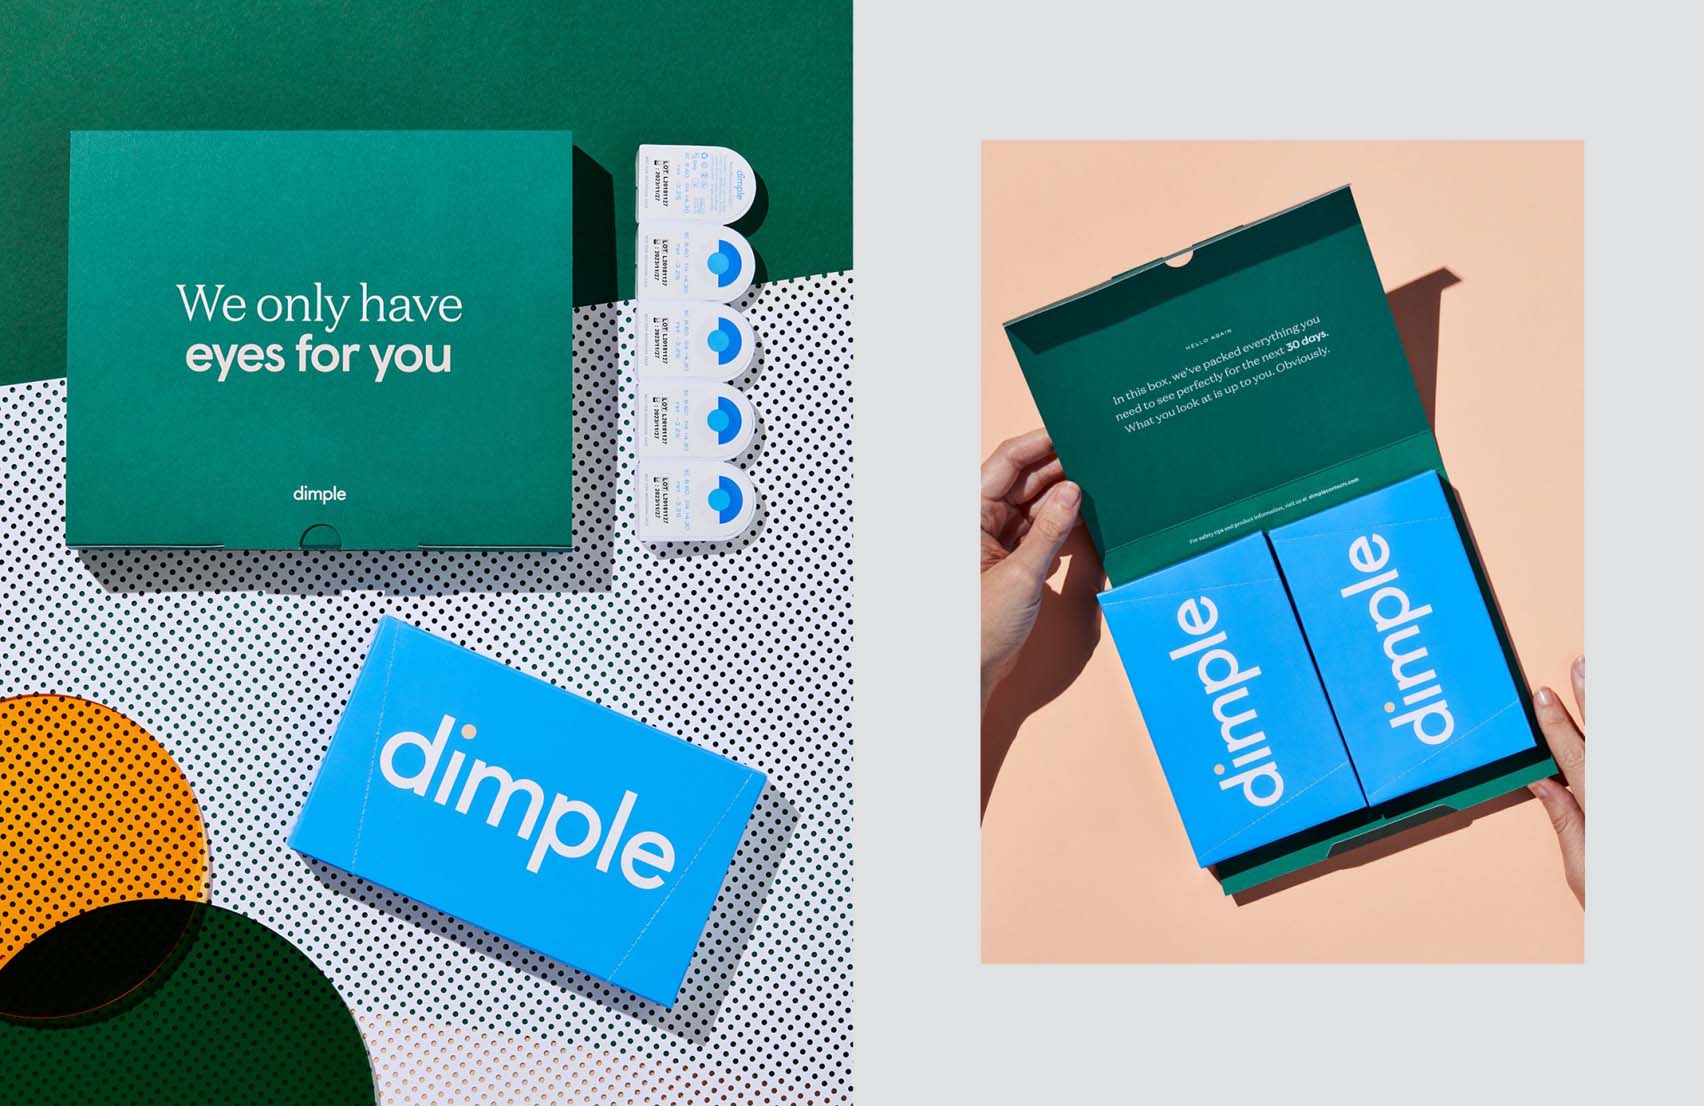 Dimple branding and packaging by Universal Favourite